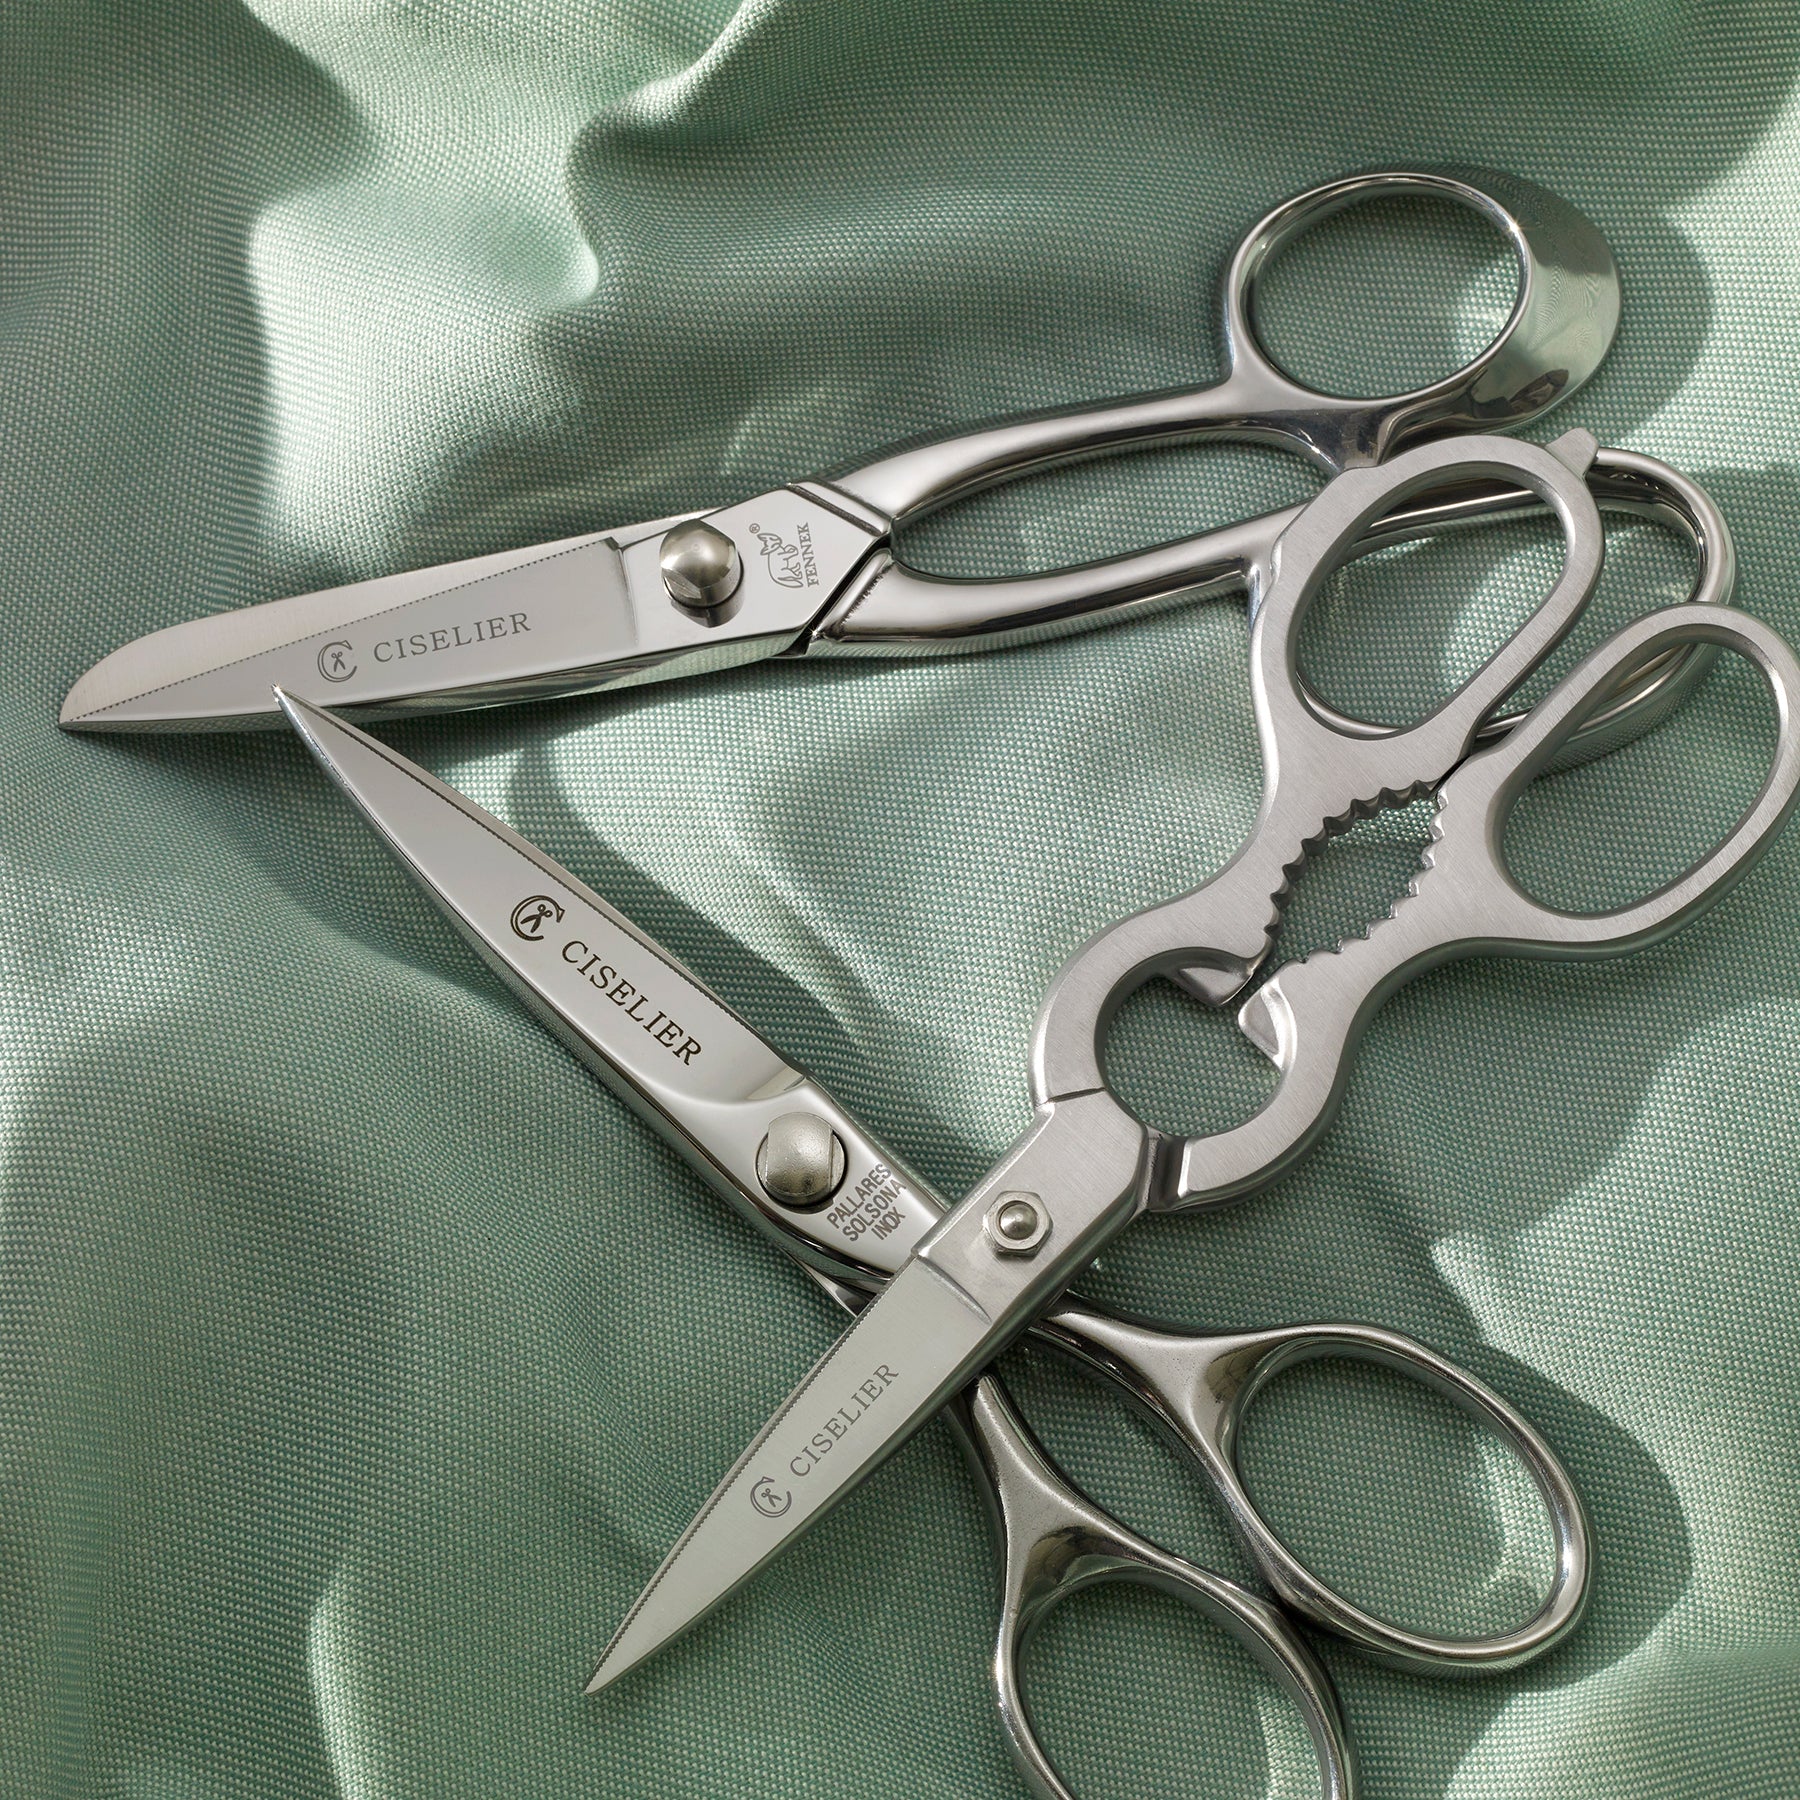 How to Use Kitchen Scissors: Prepping Fish - Ciselier Company